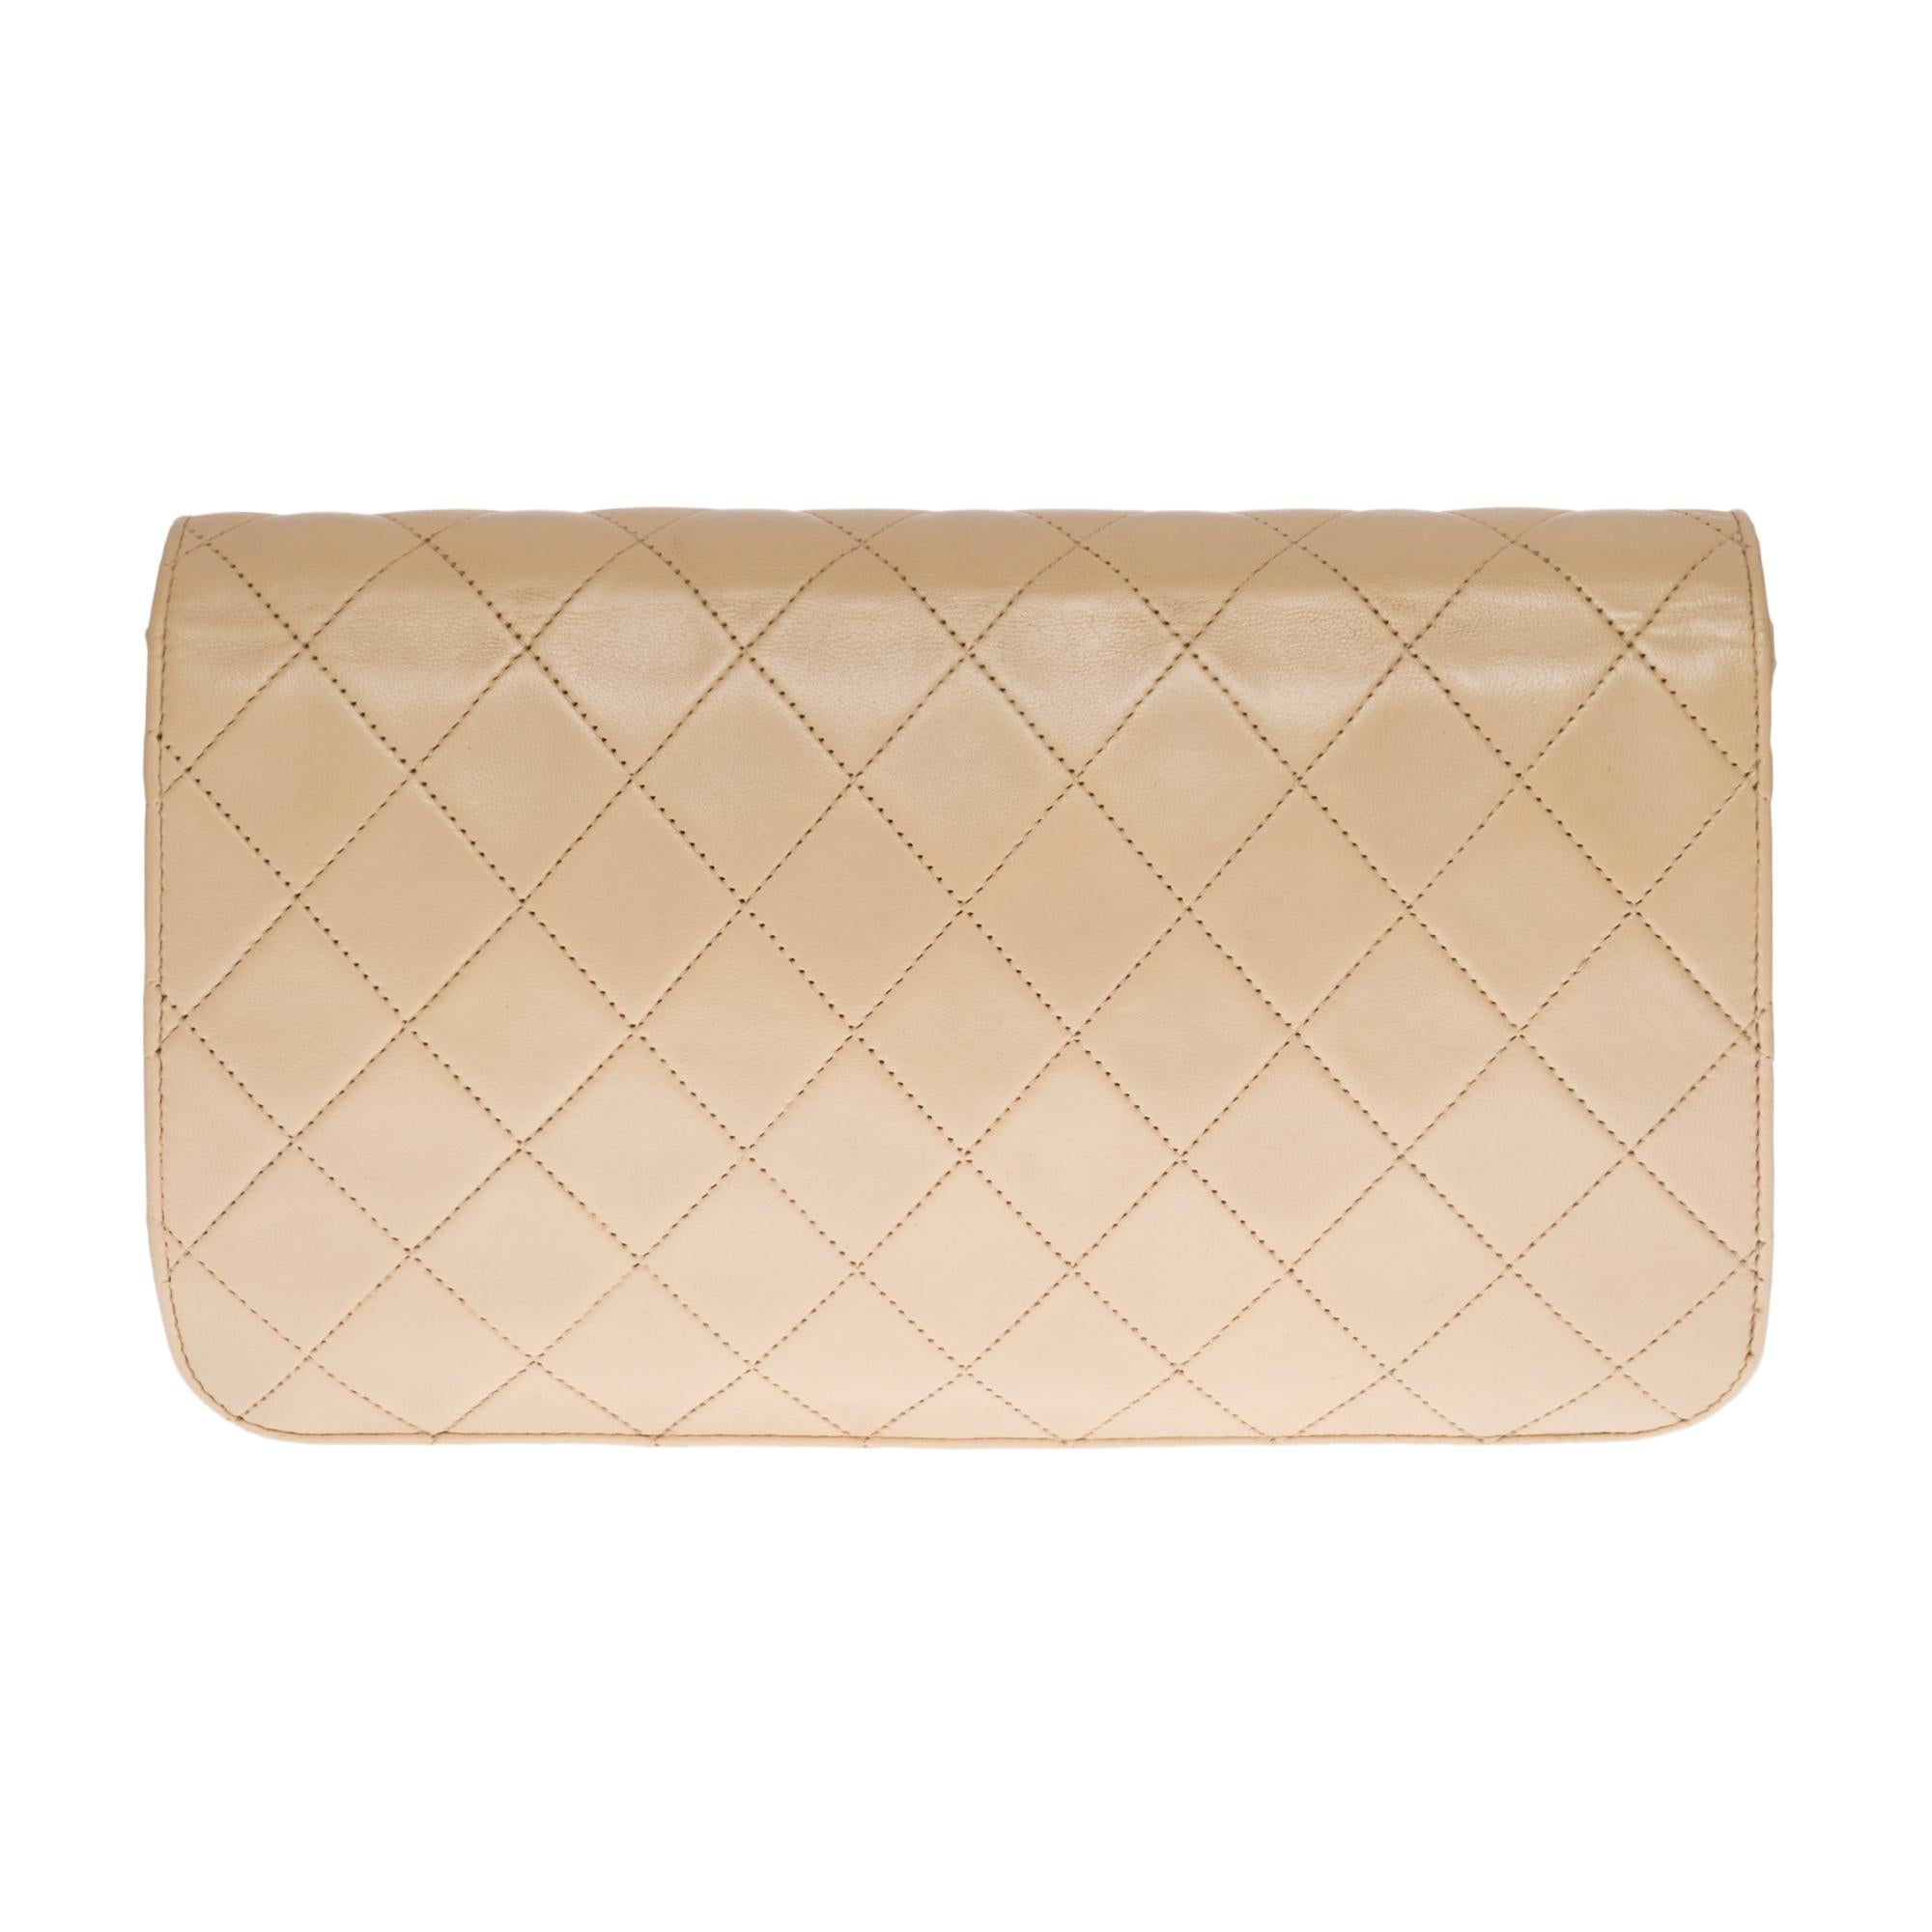 Delightful Chanel Classic full flap bag in beige quilted lambskin, gold-tone metal hardware, gold-tone metal chain interlaced with beige leather for hand or shoulder support

Flap closure, gold-tone CC clasp
Brown leather inner lining, 1 zippered